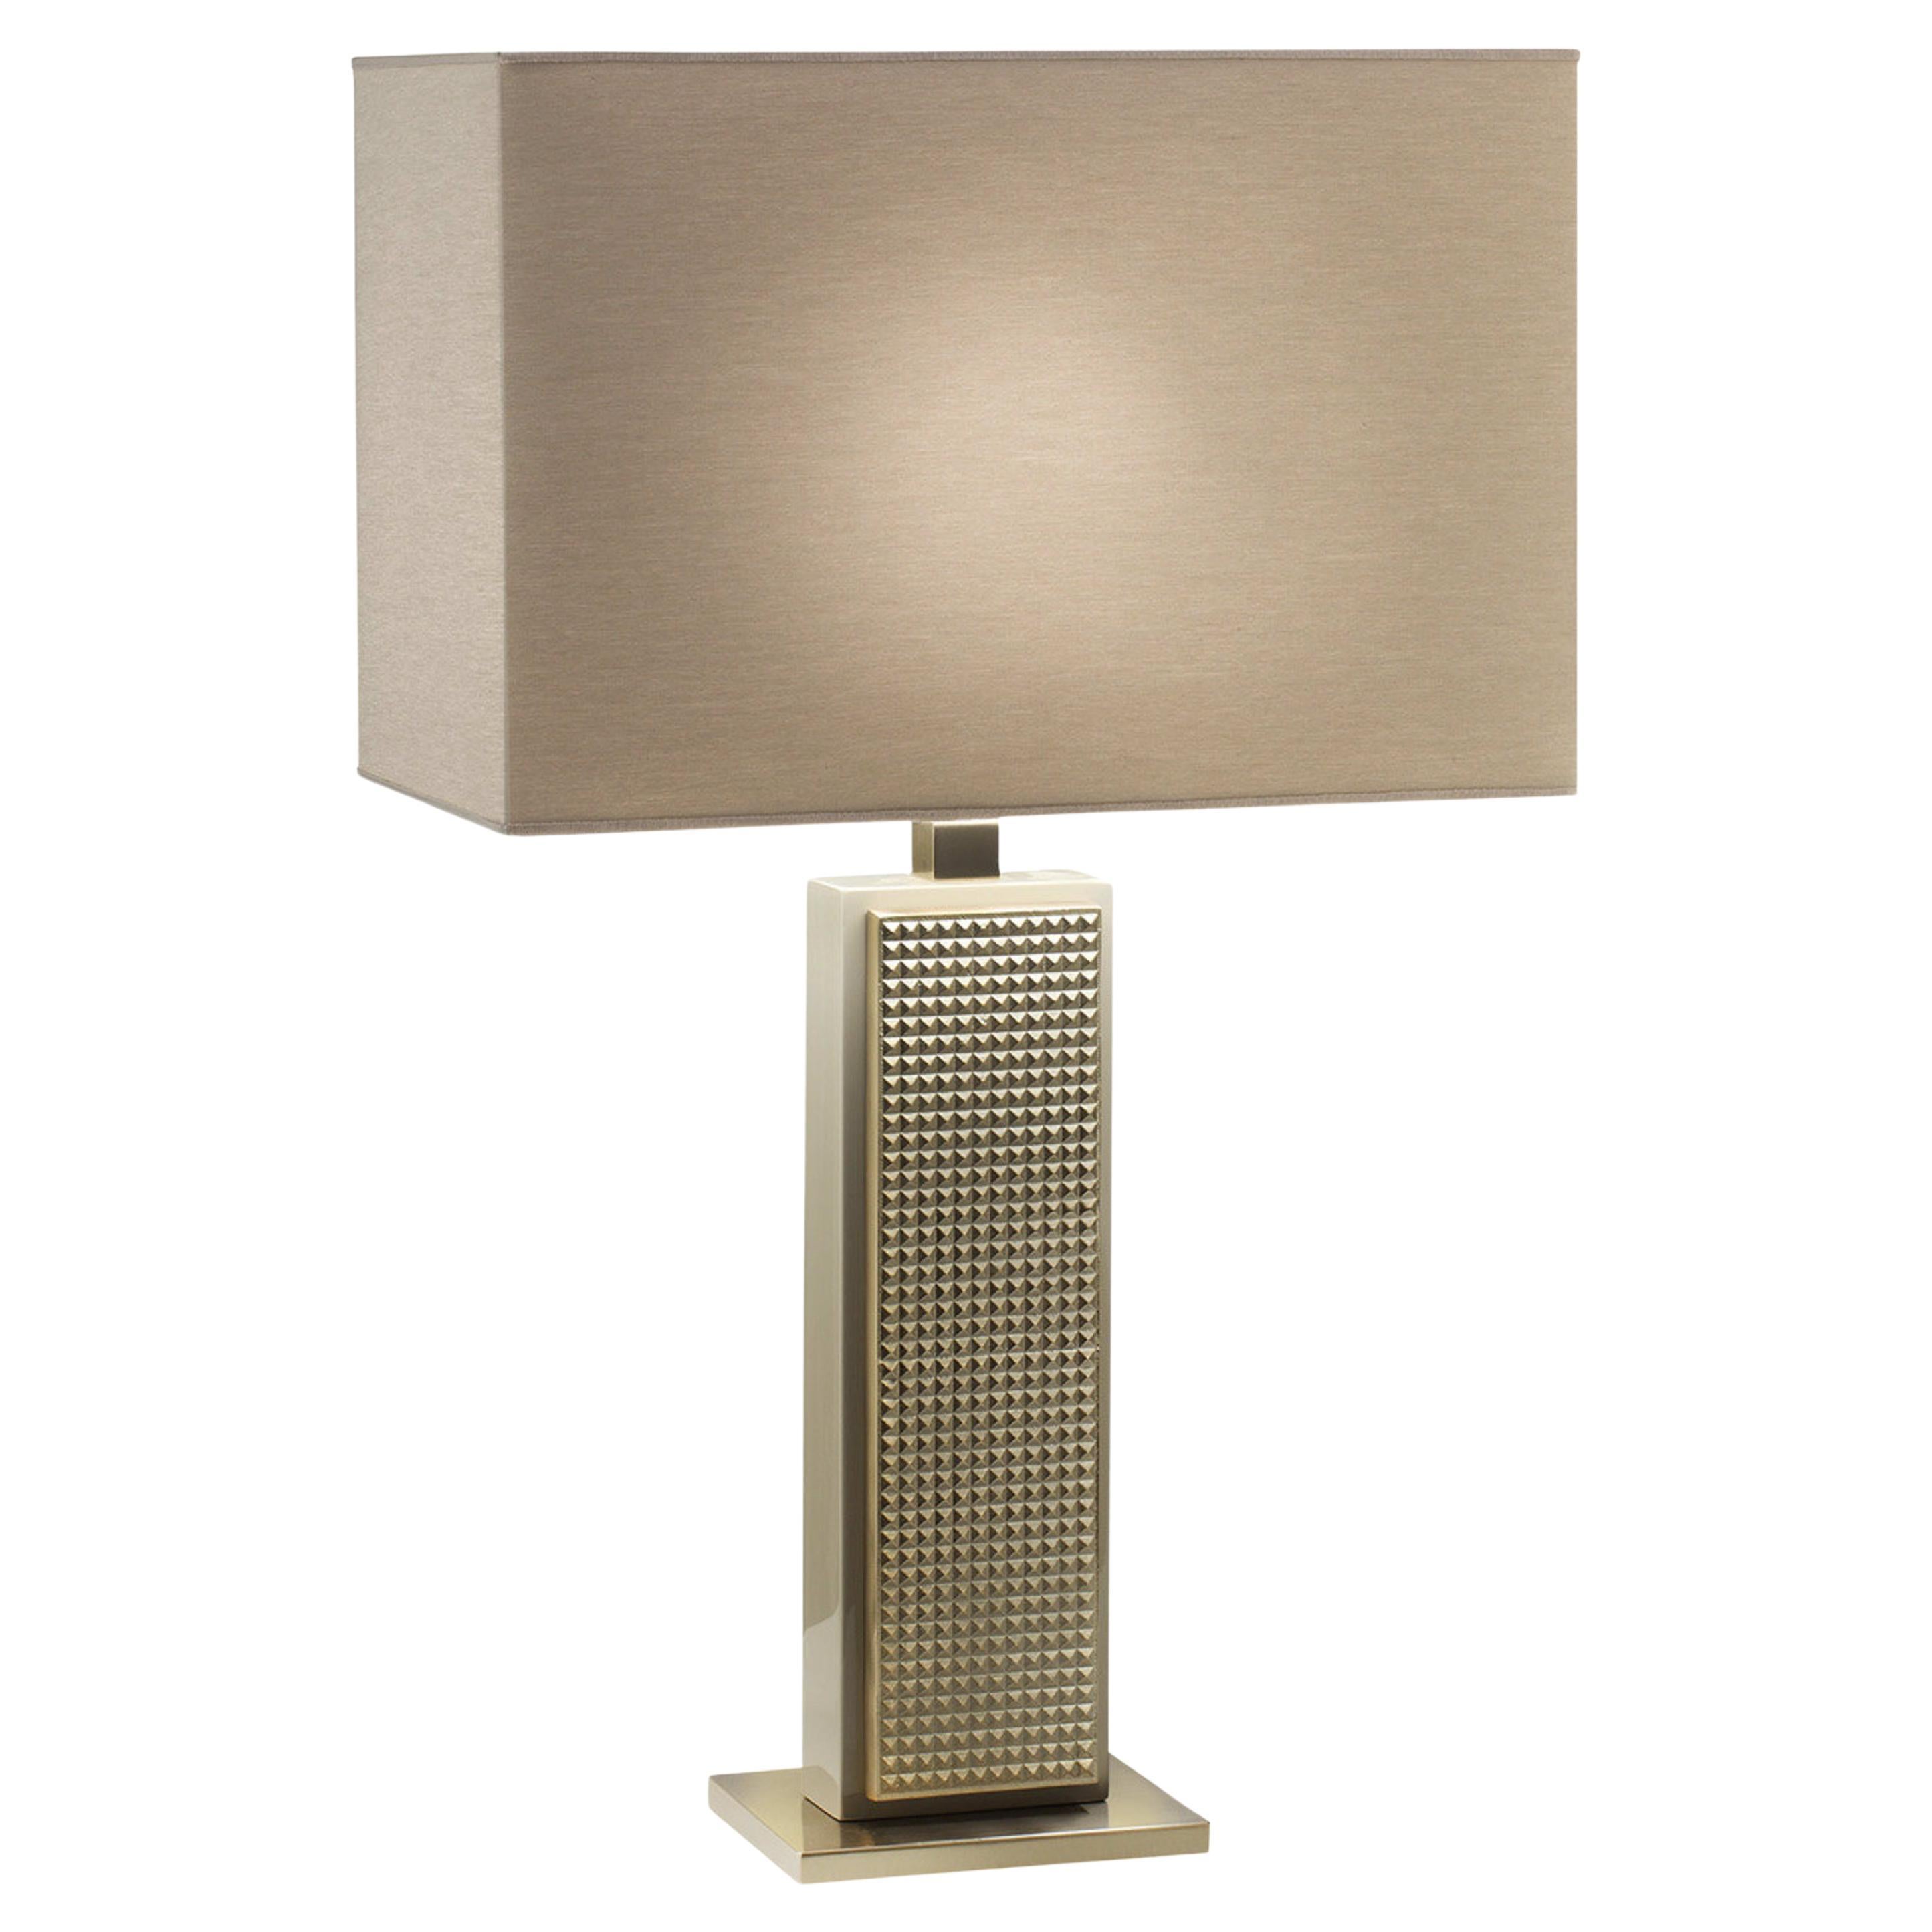 Cobalto Gold Table Lamp #1 For Sale